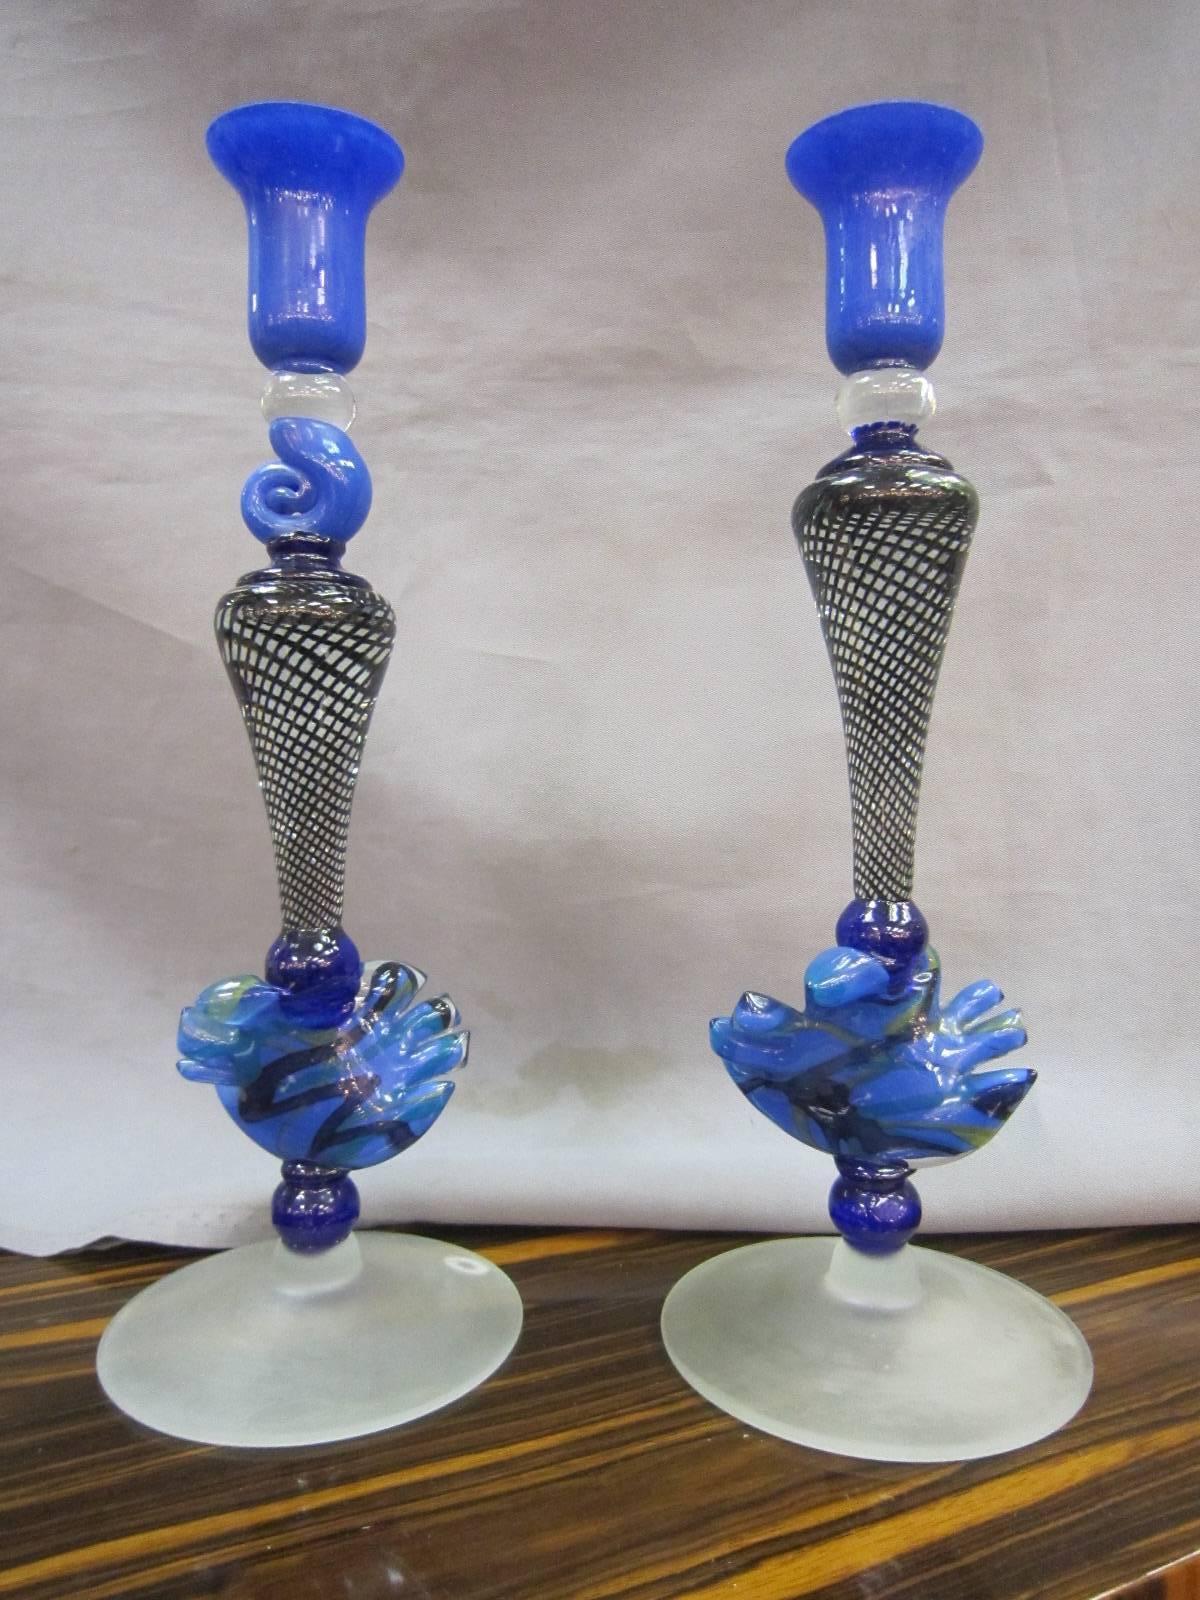 A similar pair of exceptional handblown cobalt, and clear candlesticks in various shades of blue with black lattice swirl ending in frosted feet. One candleholder has a blown snail form under the bobeche while the other has a taller flute, making